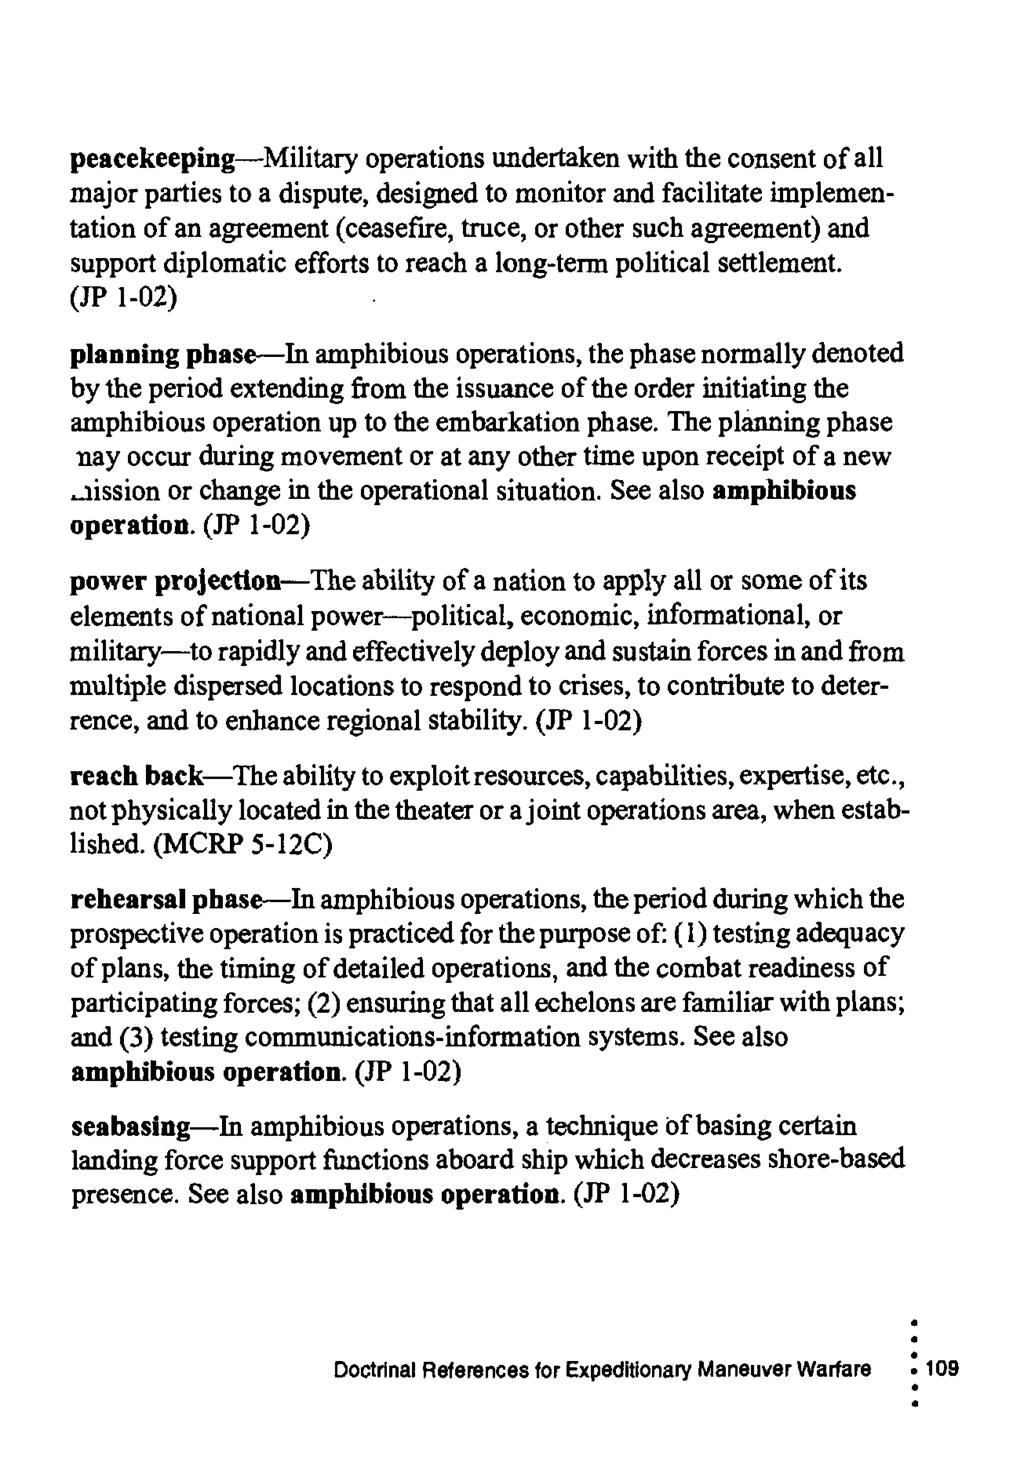 peacekeeping Military operations undertaken with the consent of all major parties to a dispute, designed to monitor and facilitate implementation of an agreement (ceasefire, truce, or other such